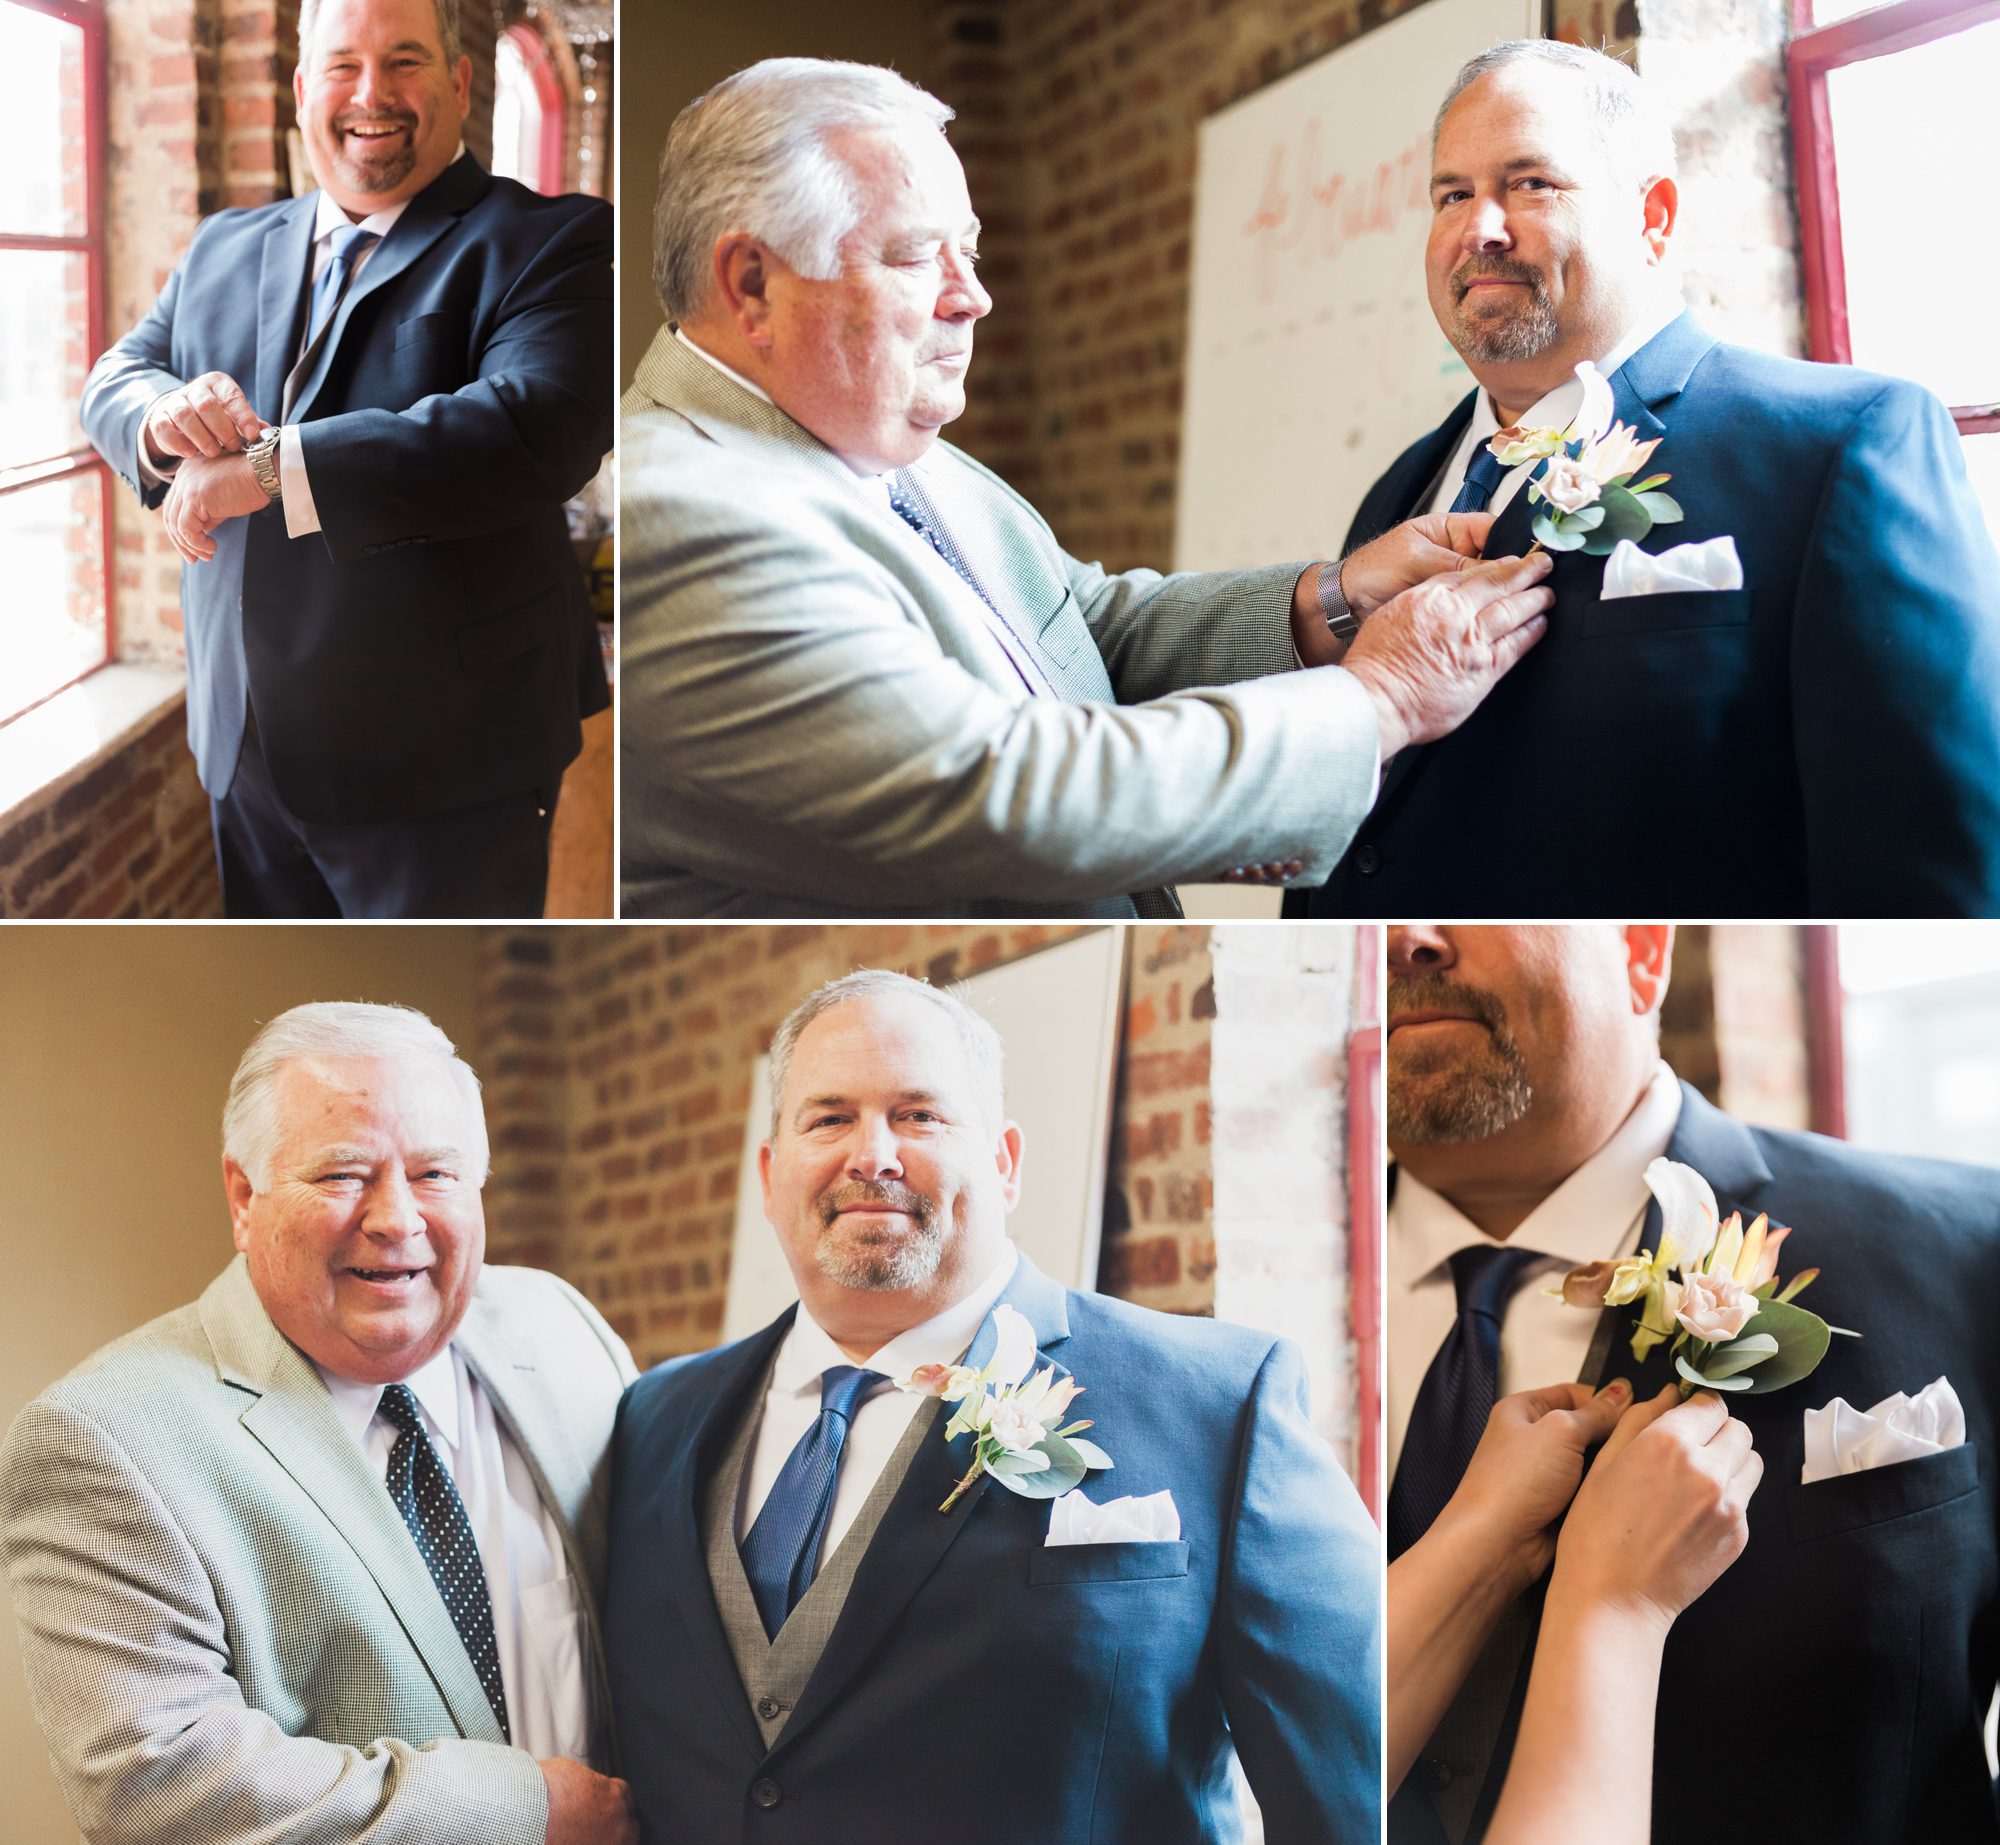 Groom getting ready with father before wedding ceremony  at Houston Station, Nashville TN. Photos by Krista Lee Photography.